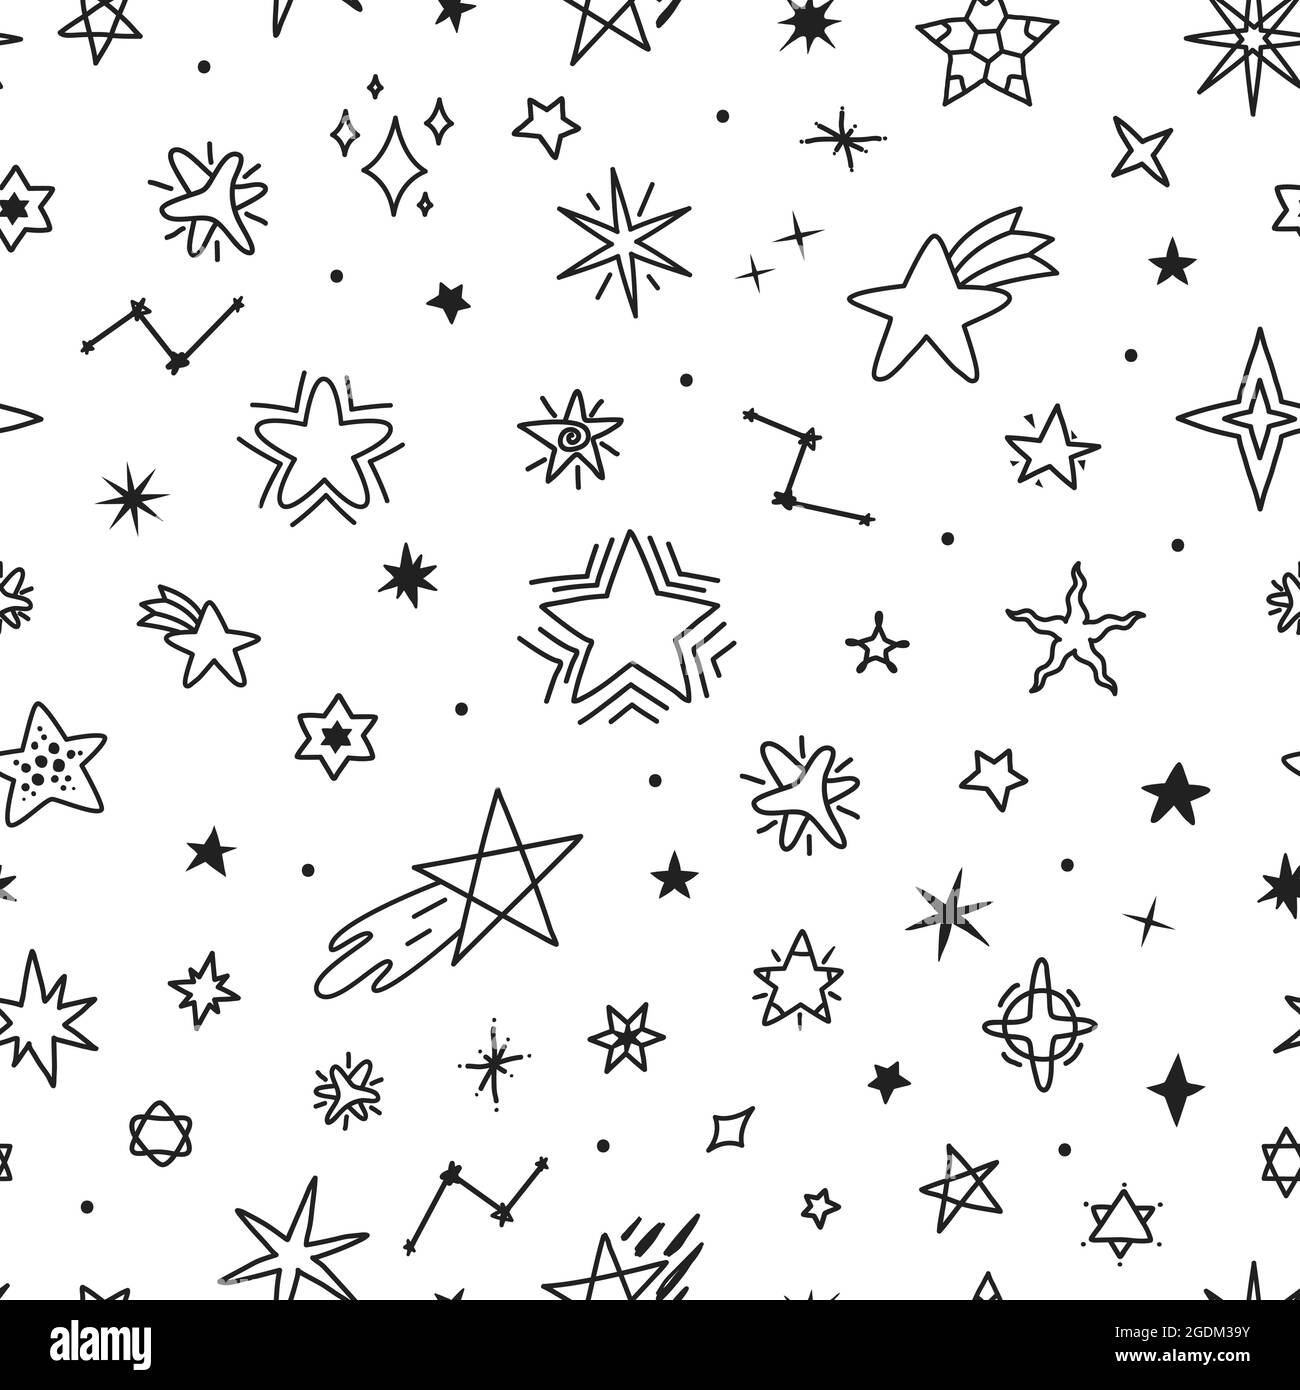 Sketch star. cute star shape, black starburst doodle sign for christmas  decoration isolated on white background. | CanStock